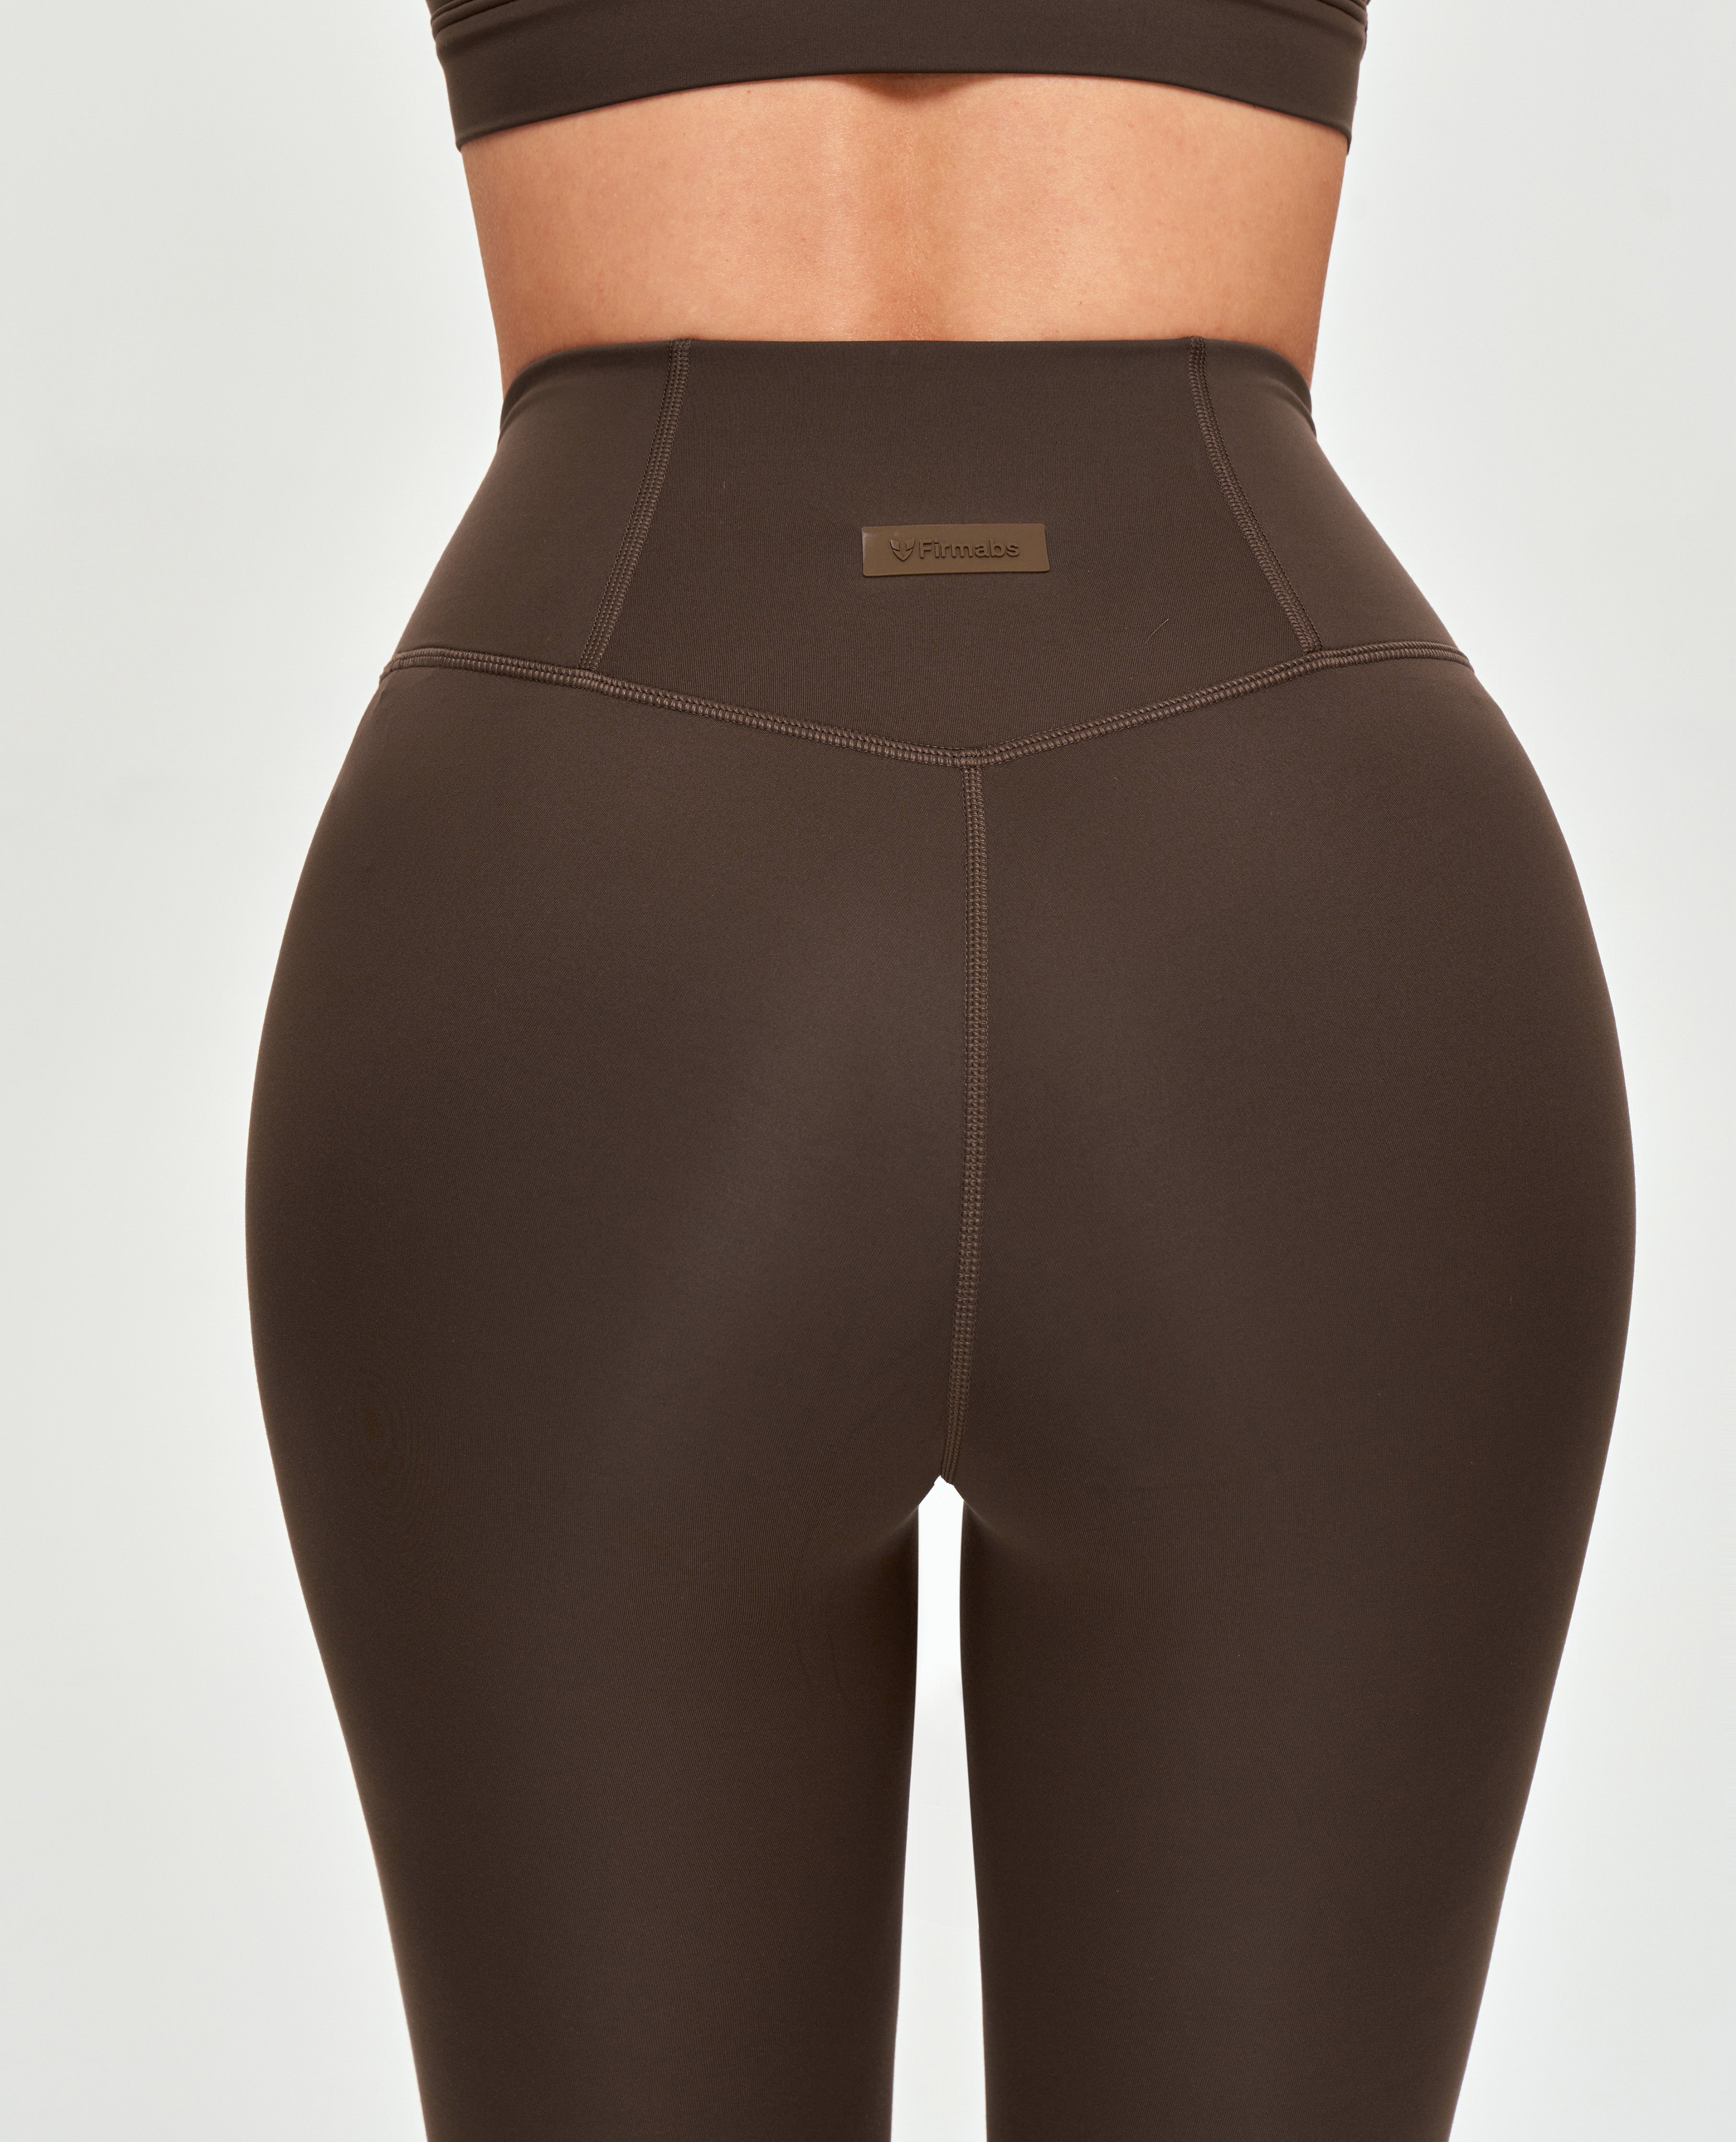 High Waisted Workout Leggings - Brown